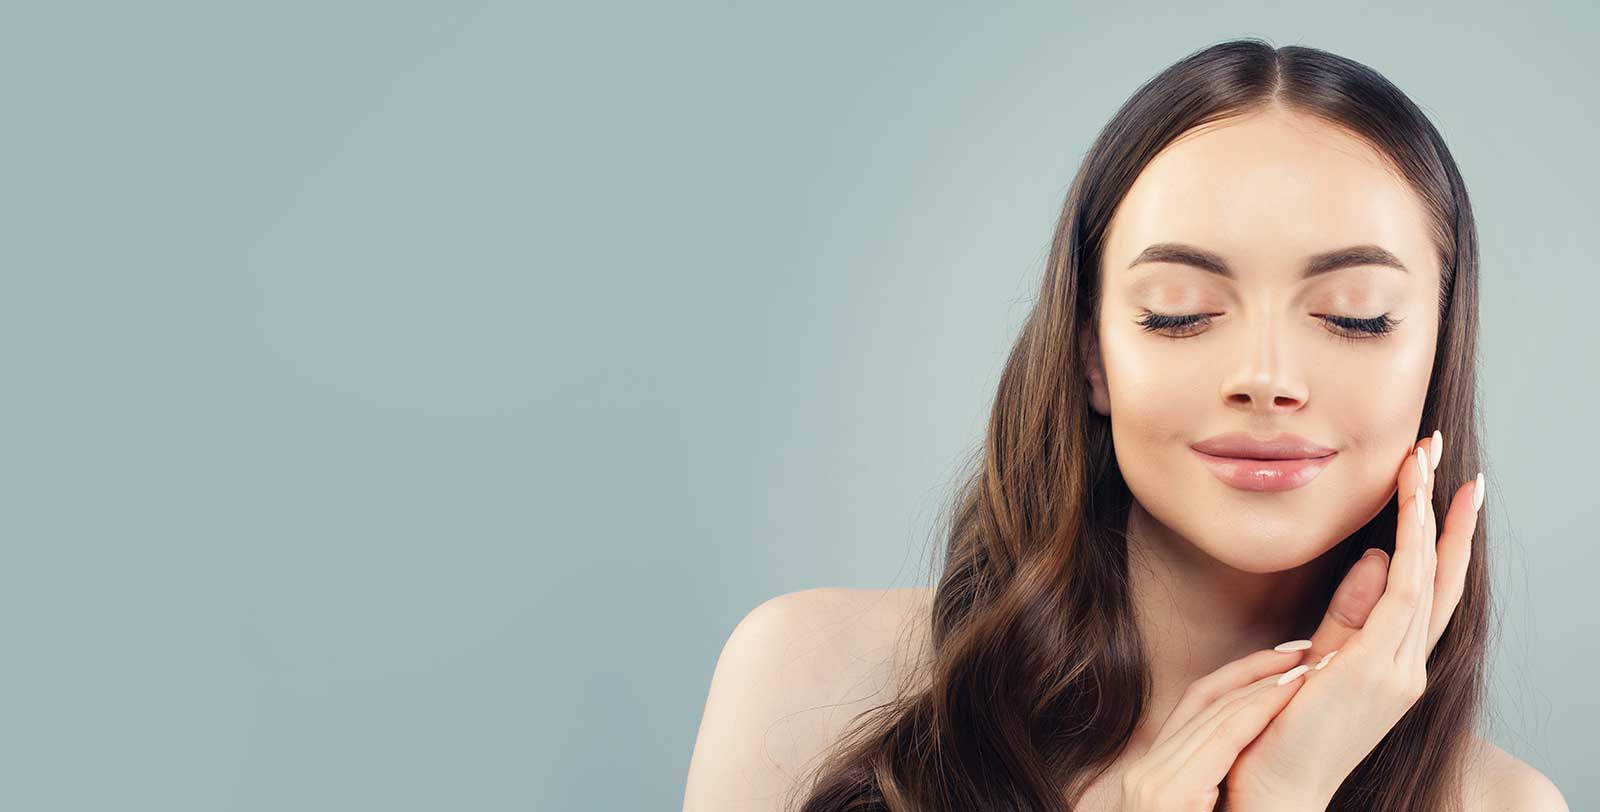 What’s the Difference Between BOTOX® and Dysport®?